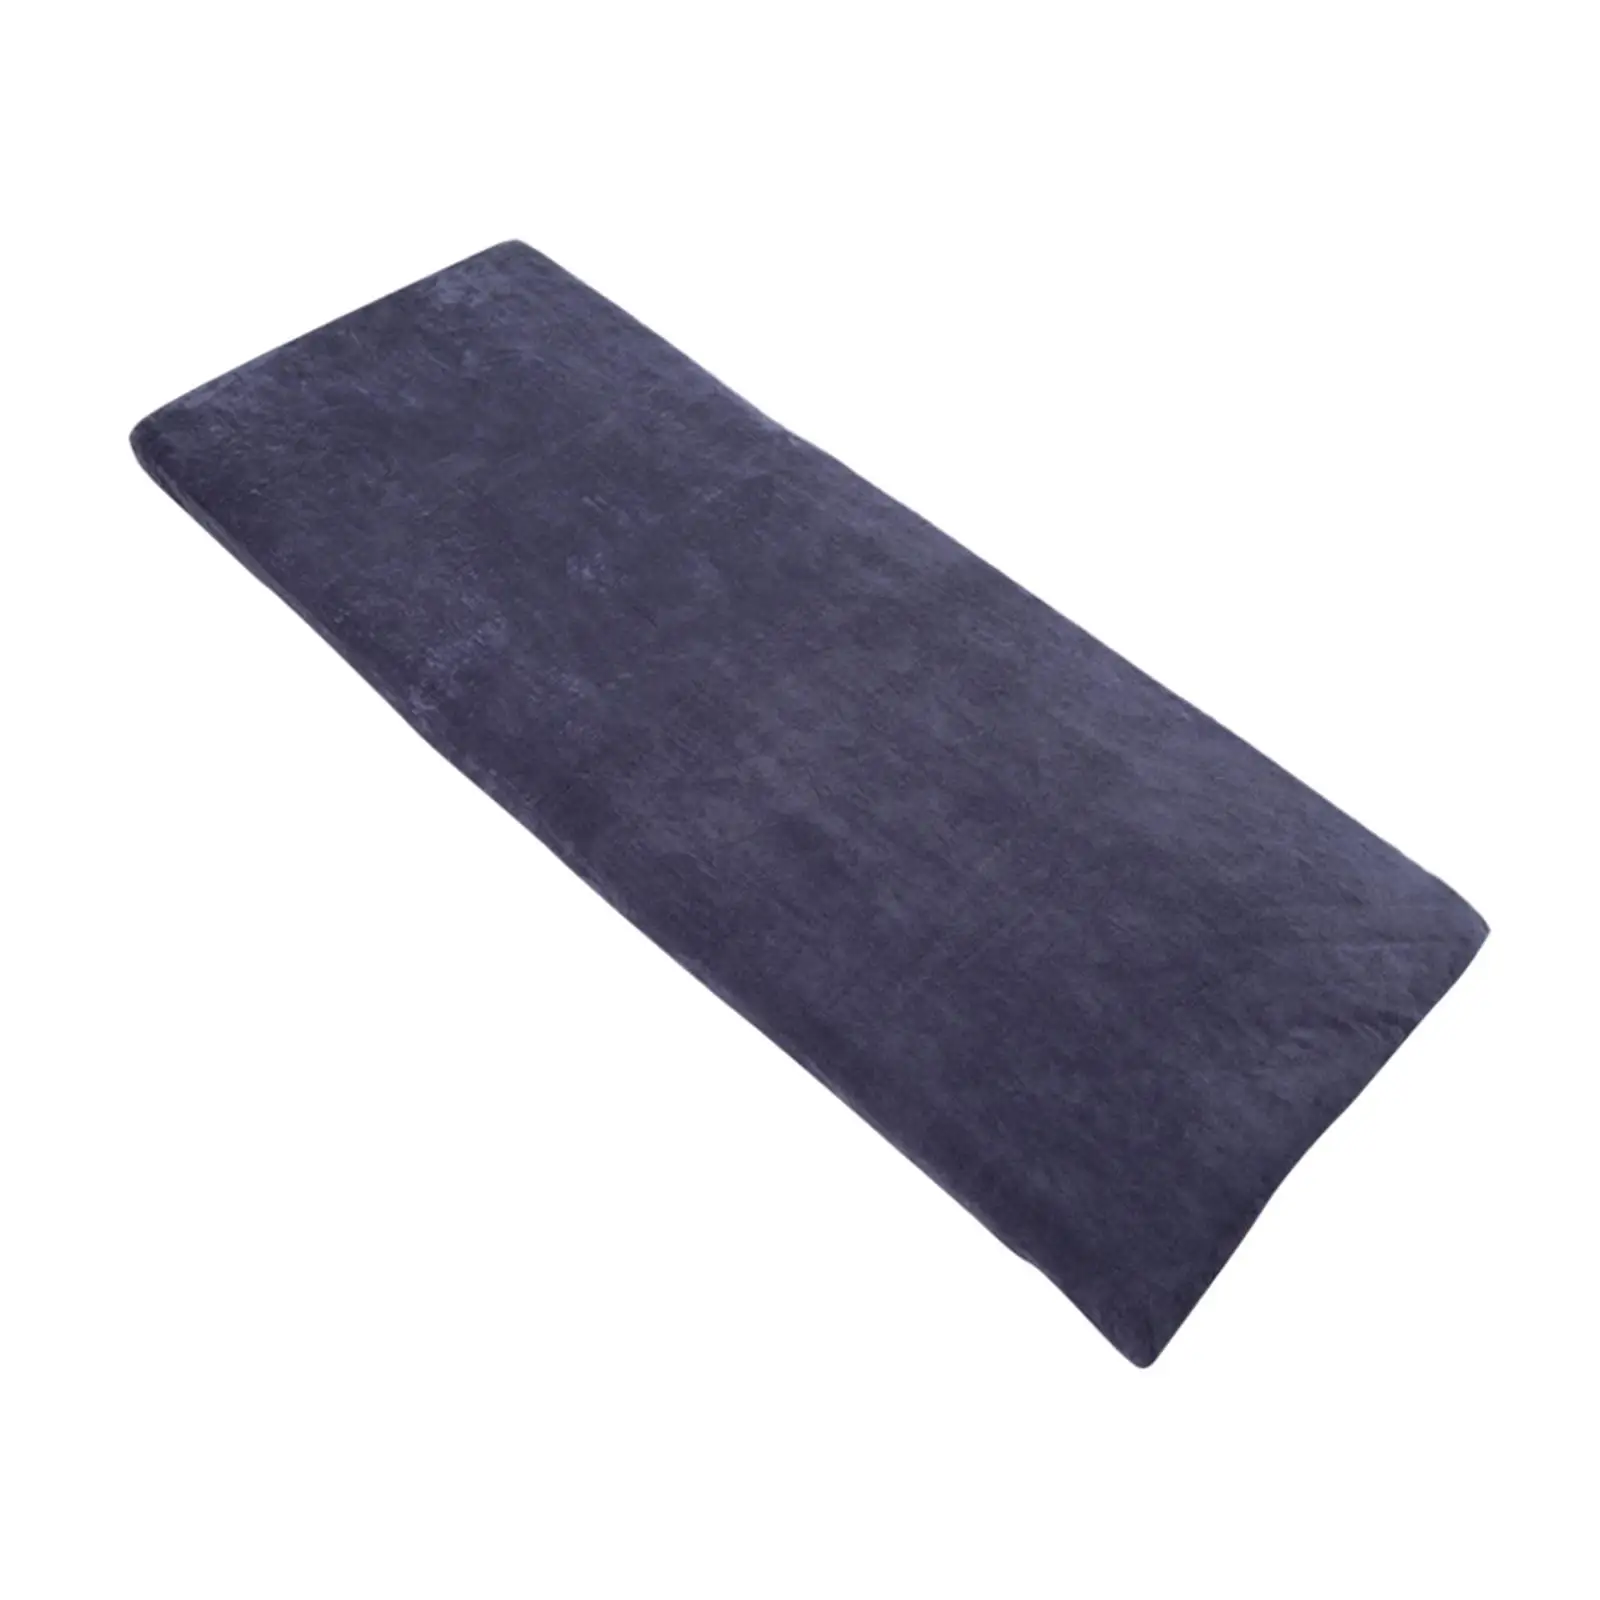 Massage Table Sheet Covers Washable Coverlet Durable Easy to Use Towel Protector Care for Massage Bed Spa Beauty Salon